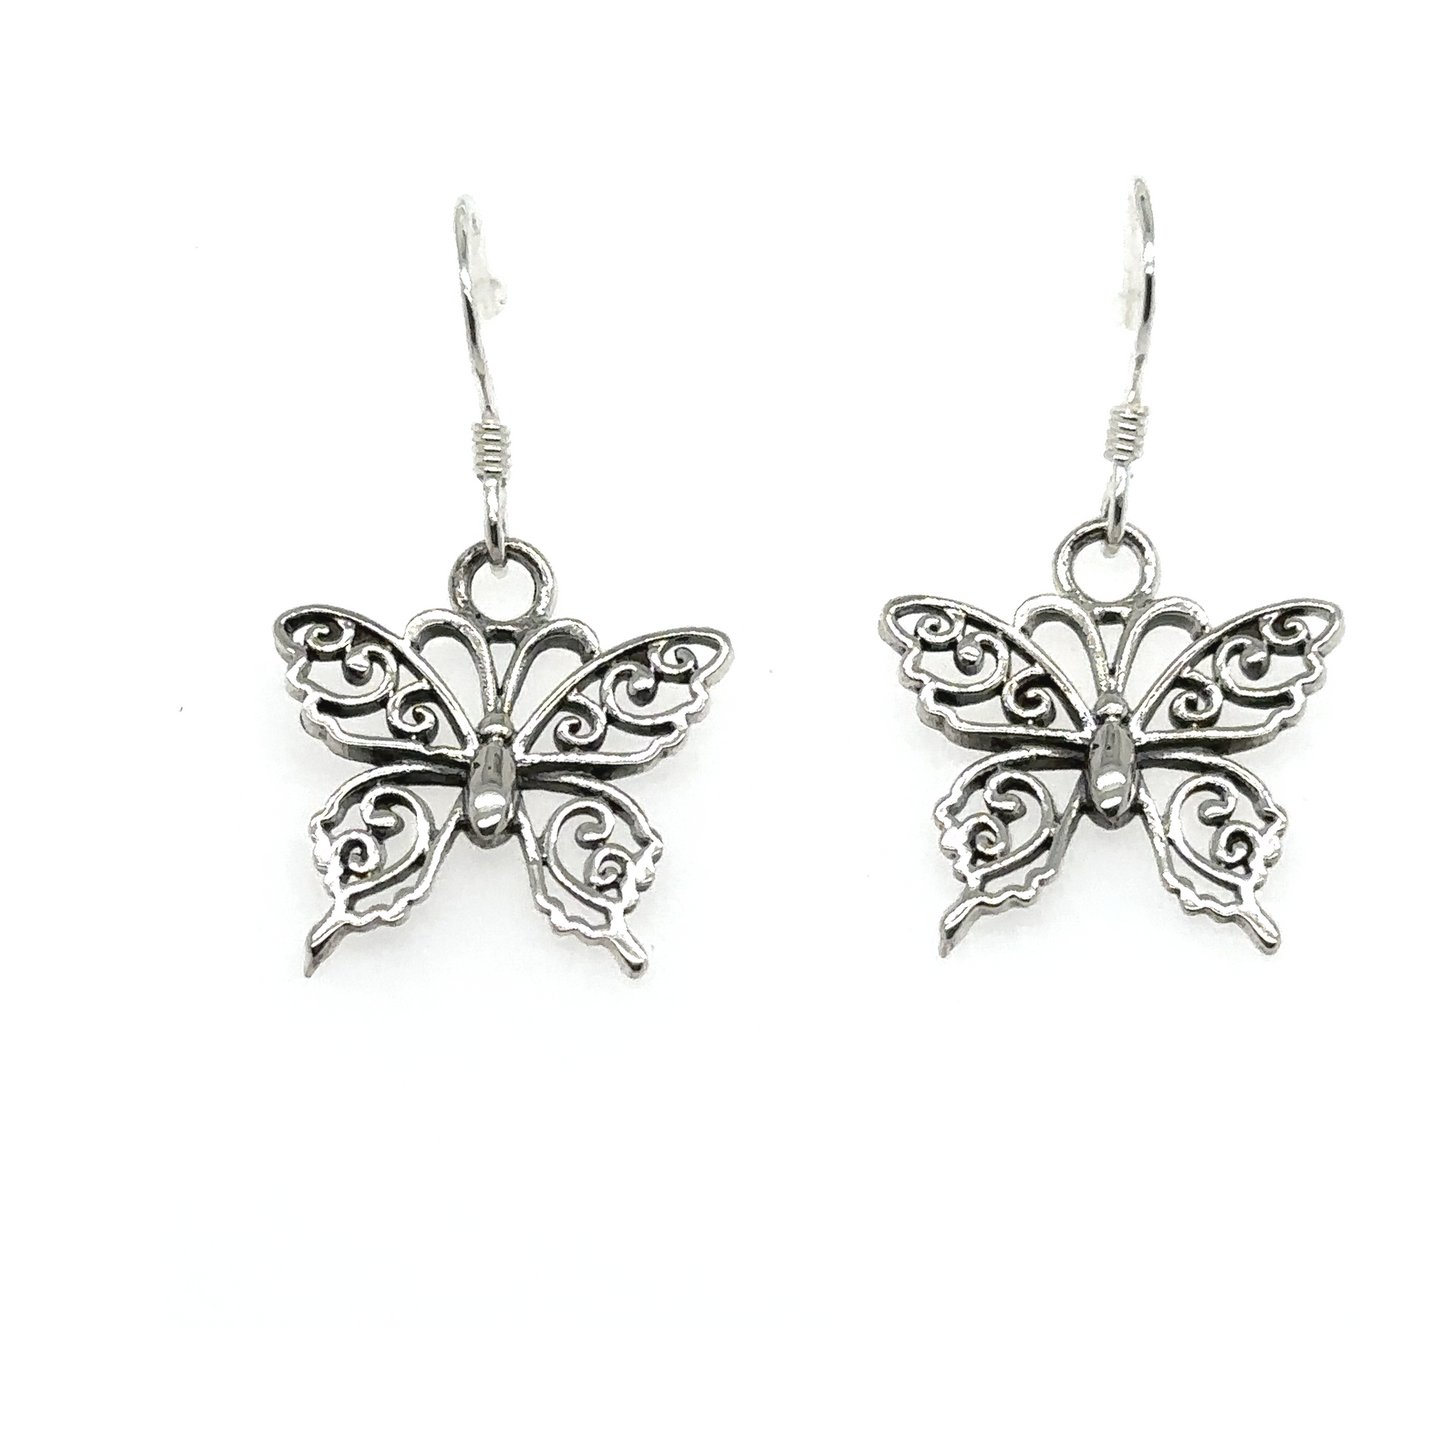 A pair of Super Silver Small Filigree Butterfly Earrings, showcasing a delicate filigree design, displayed against a clean white background.